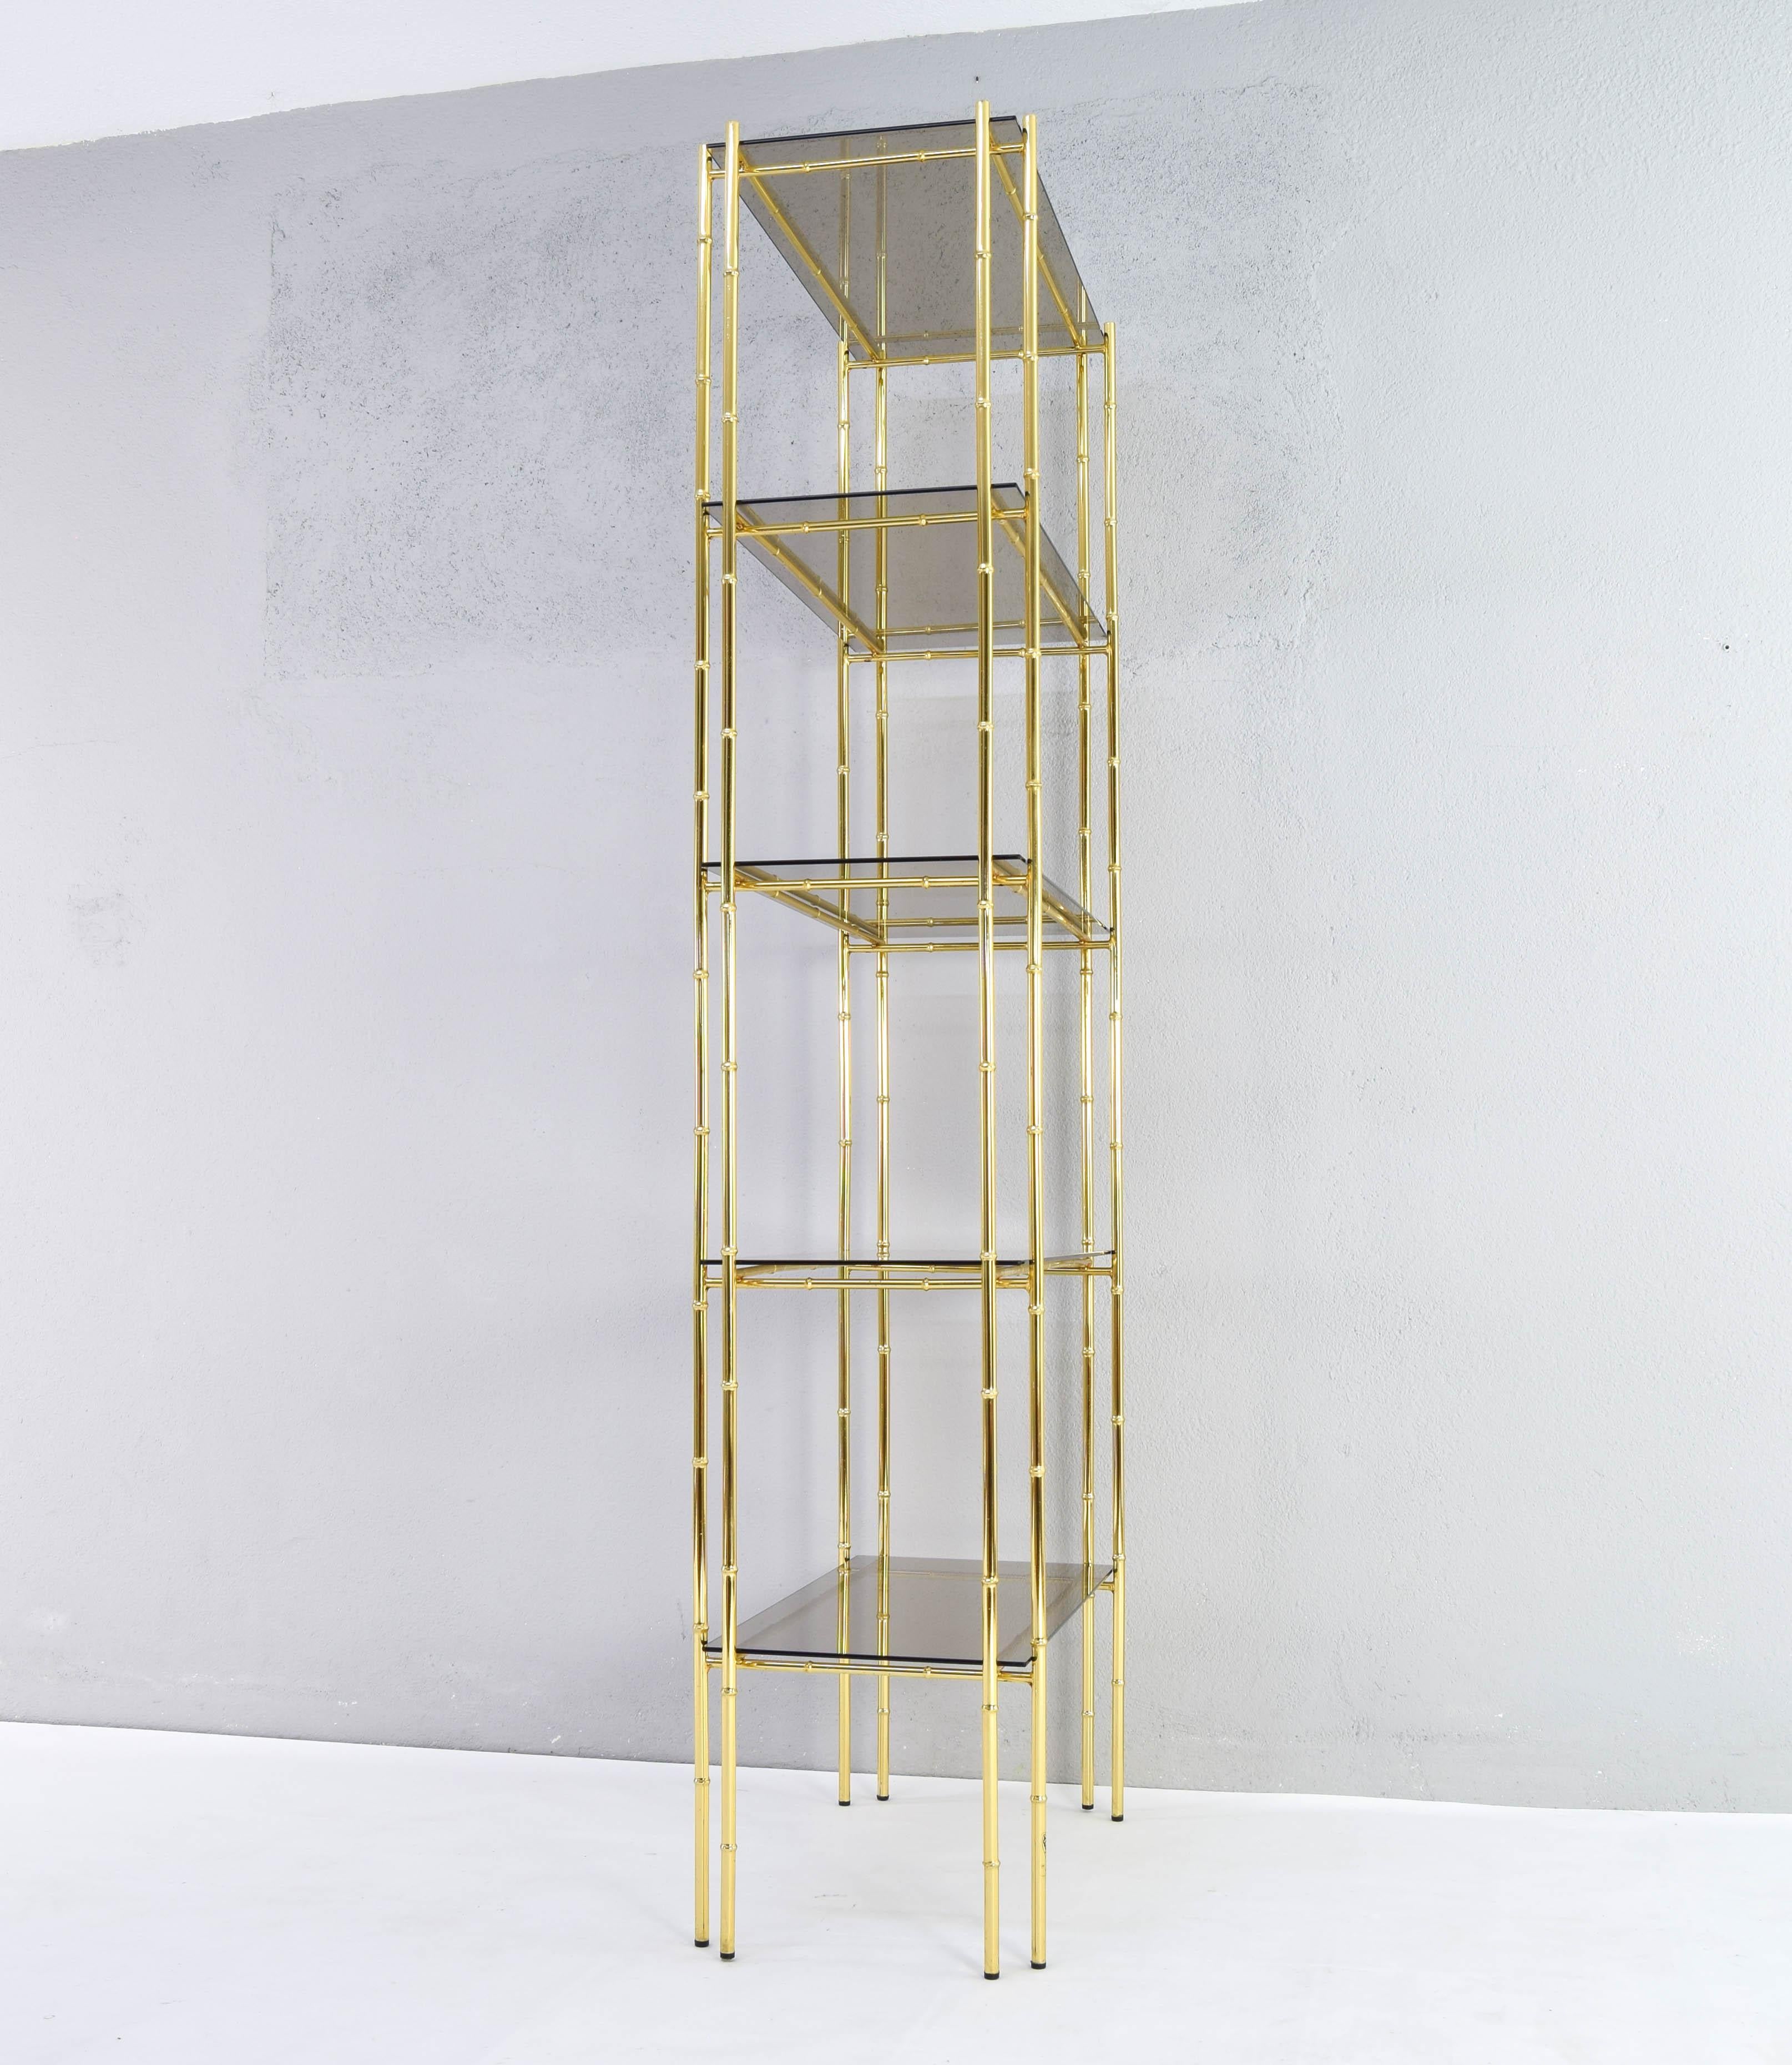 Late 20th Century Hollywood Regency Bamboo Shelf Gold Plated and Smoked Glass, Manises Spain 70s